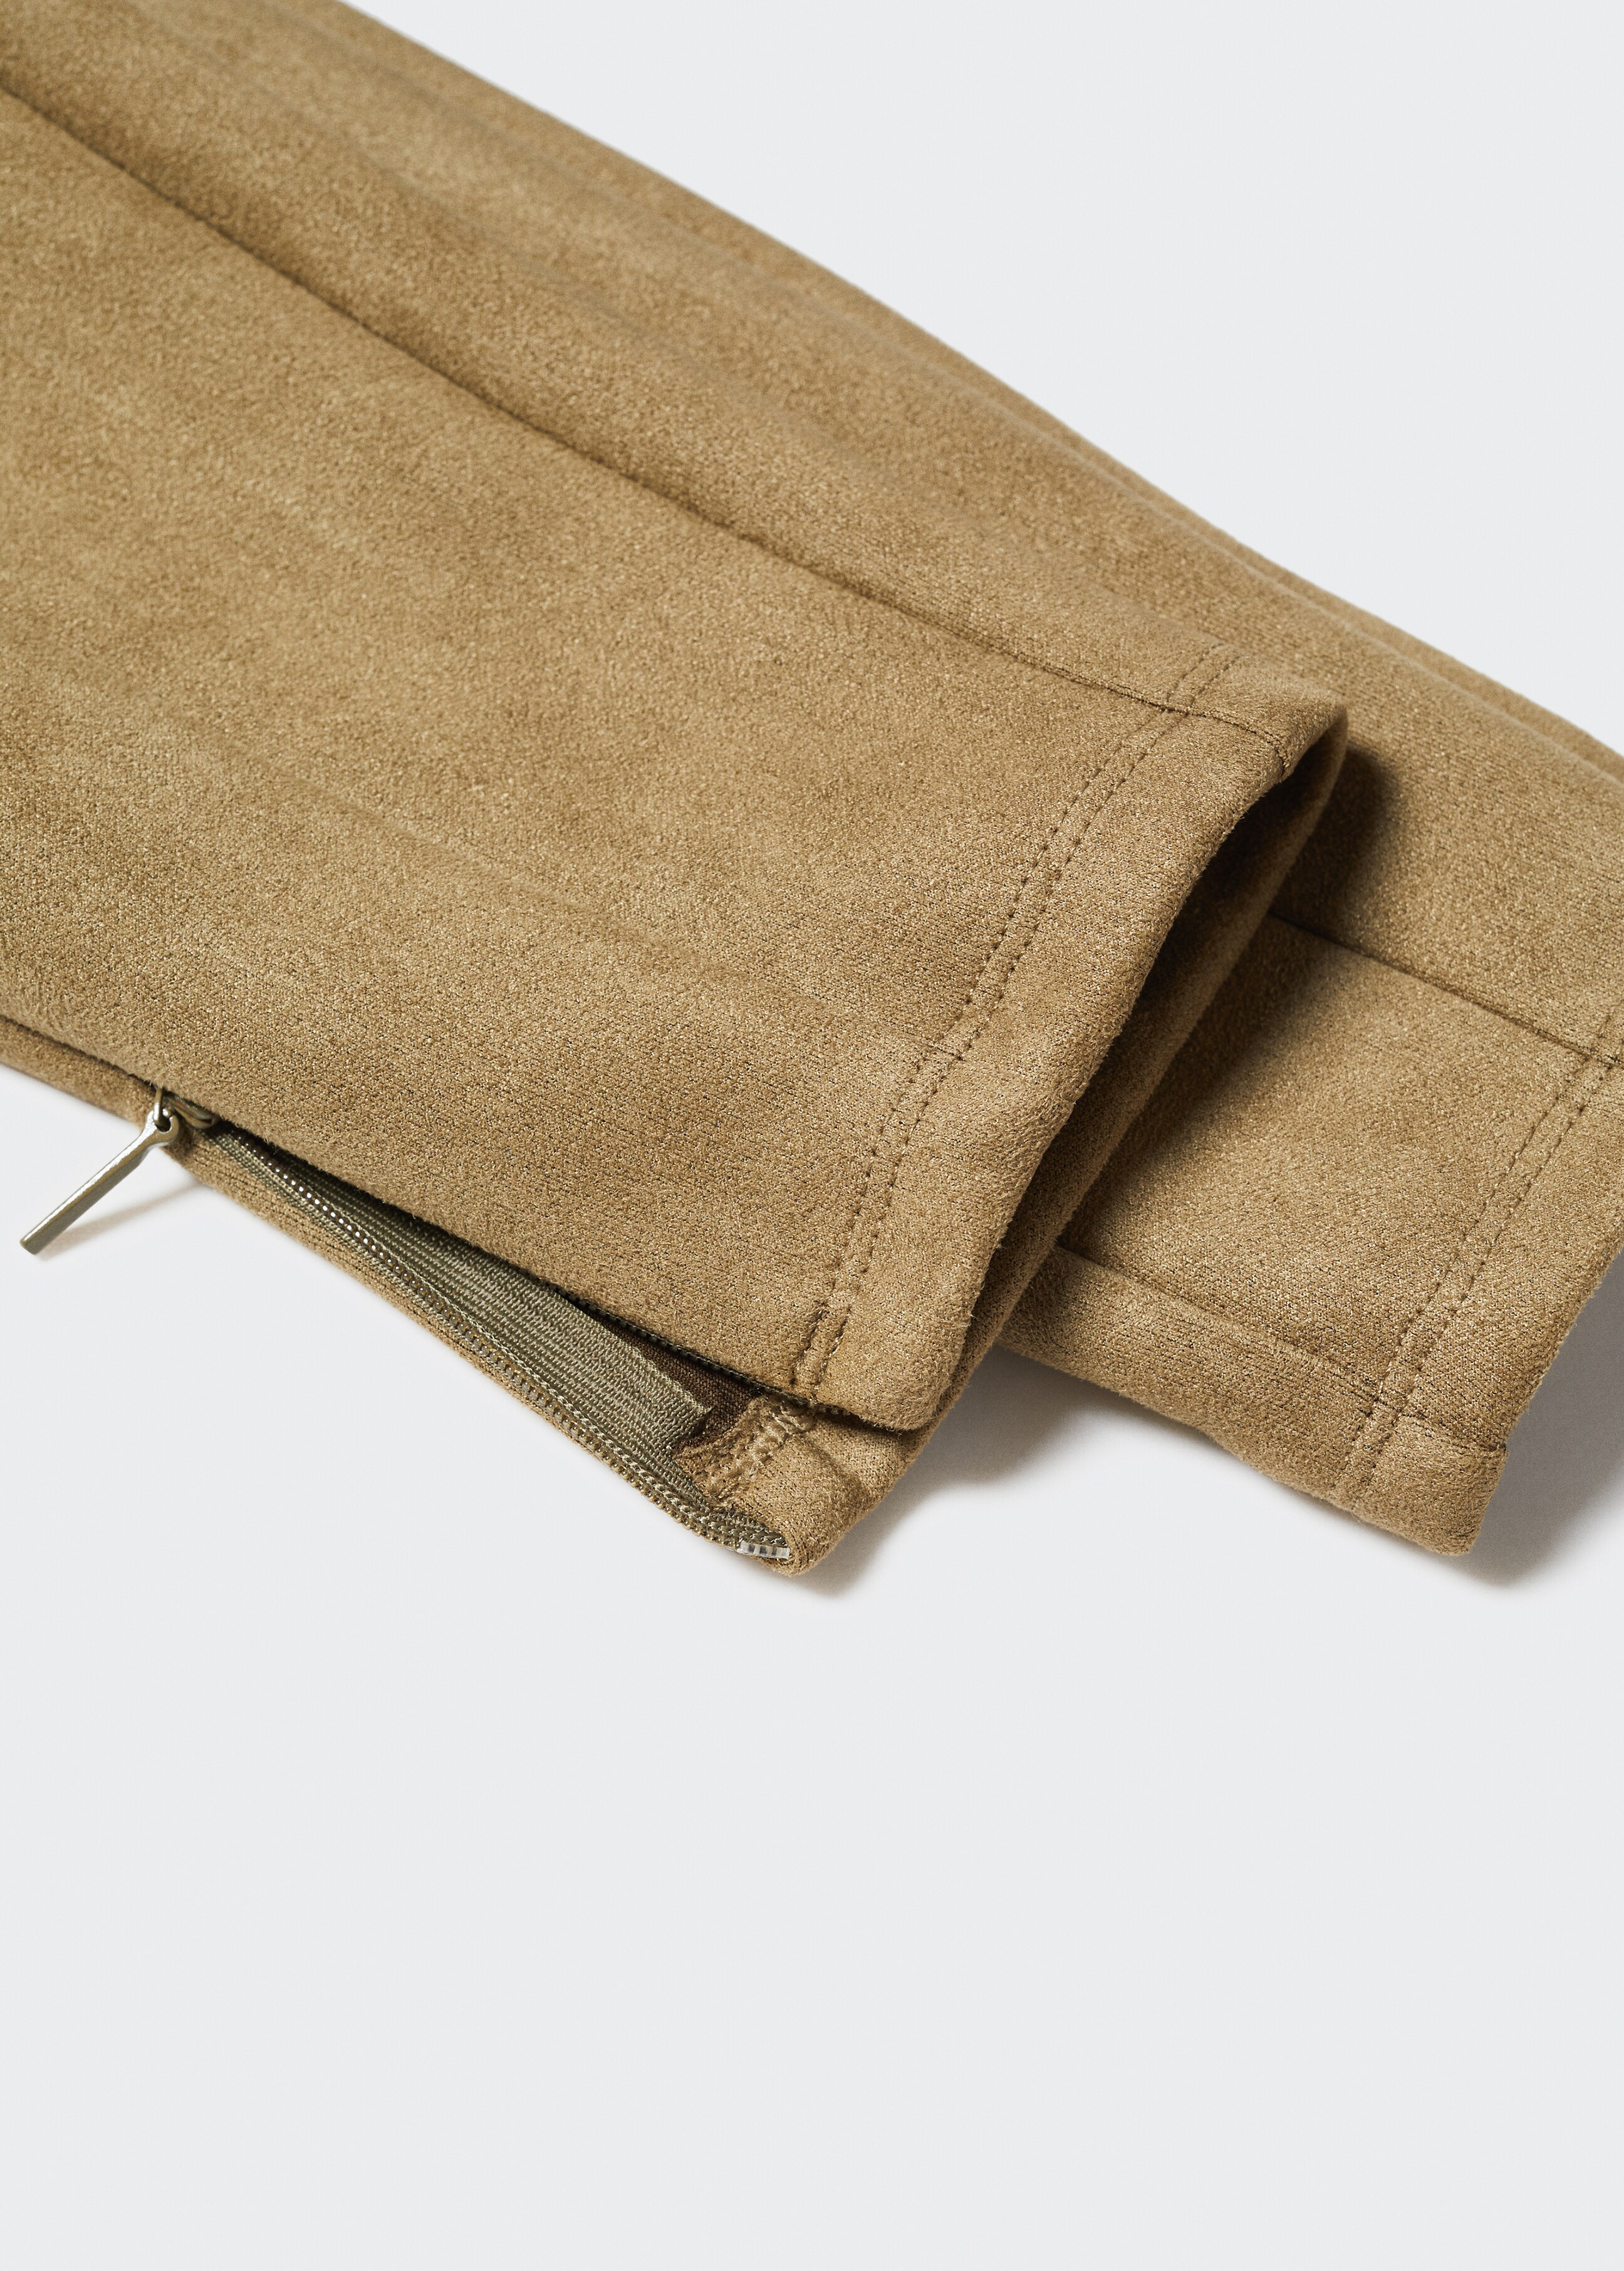 Suede leggings - Details of the article 8